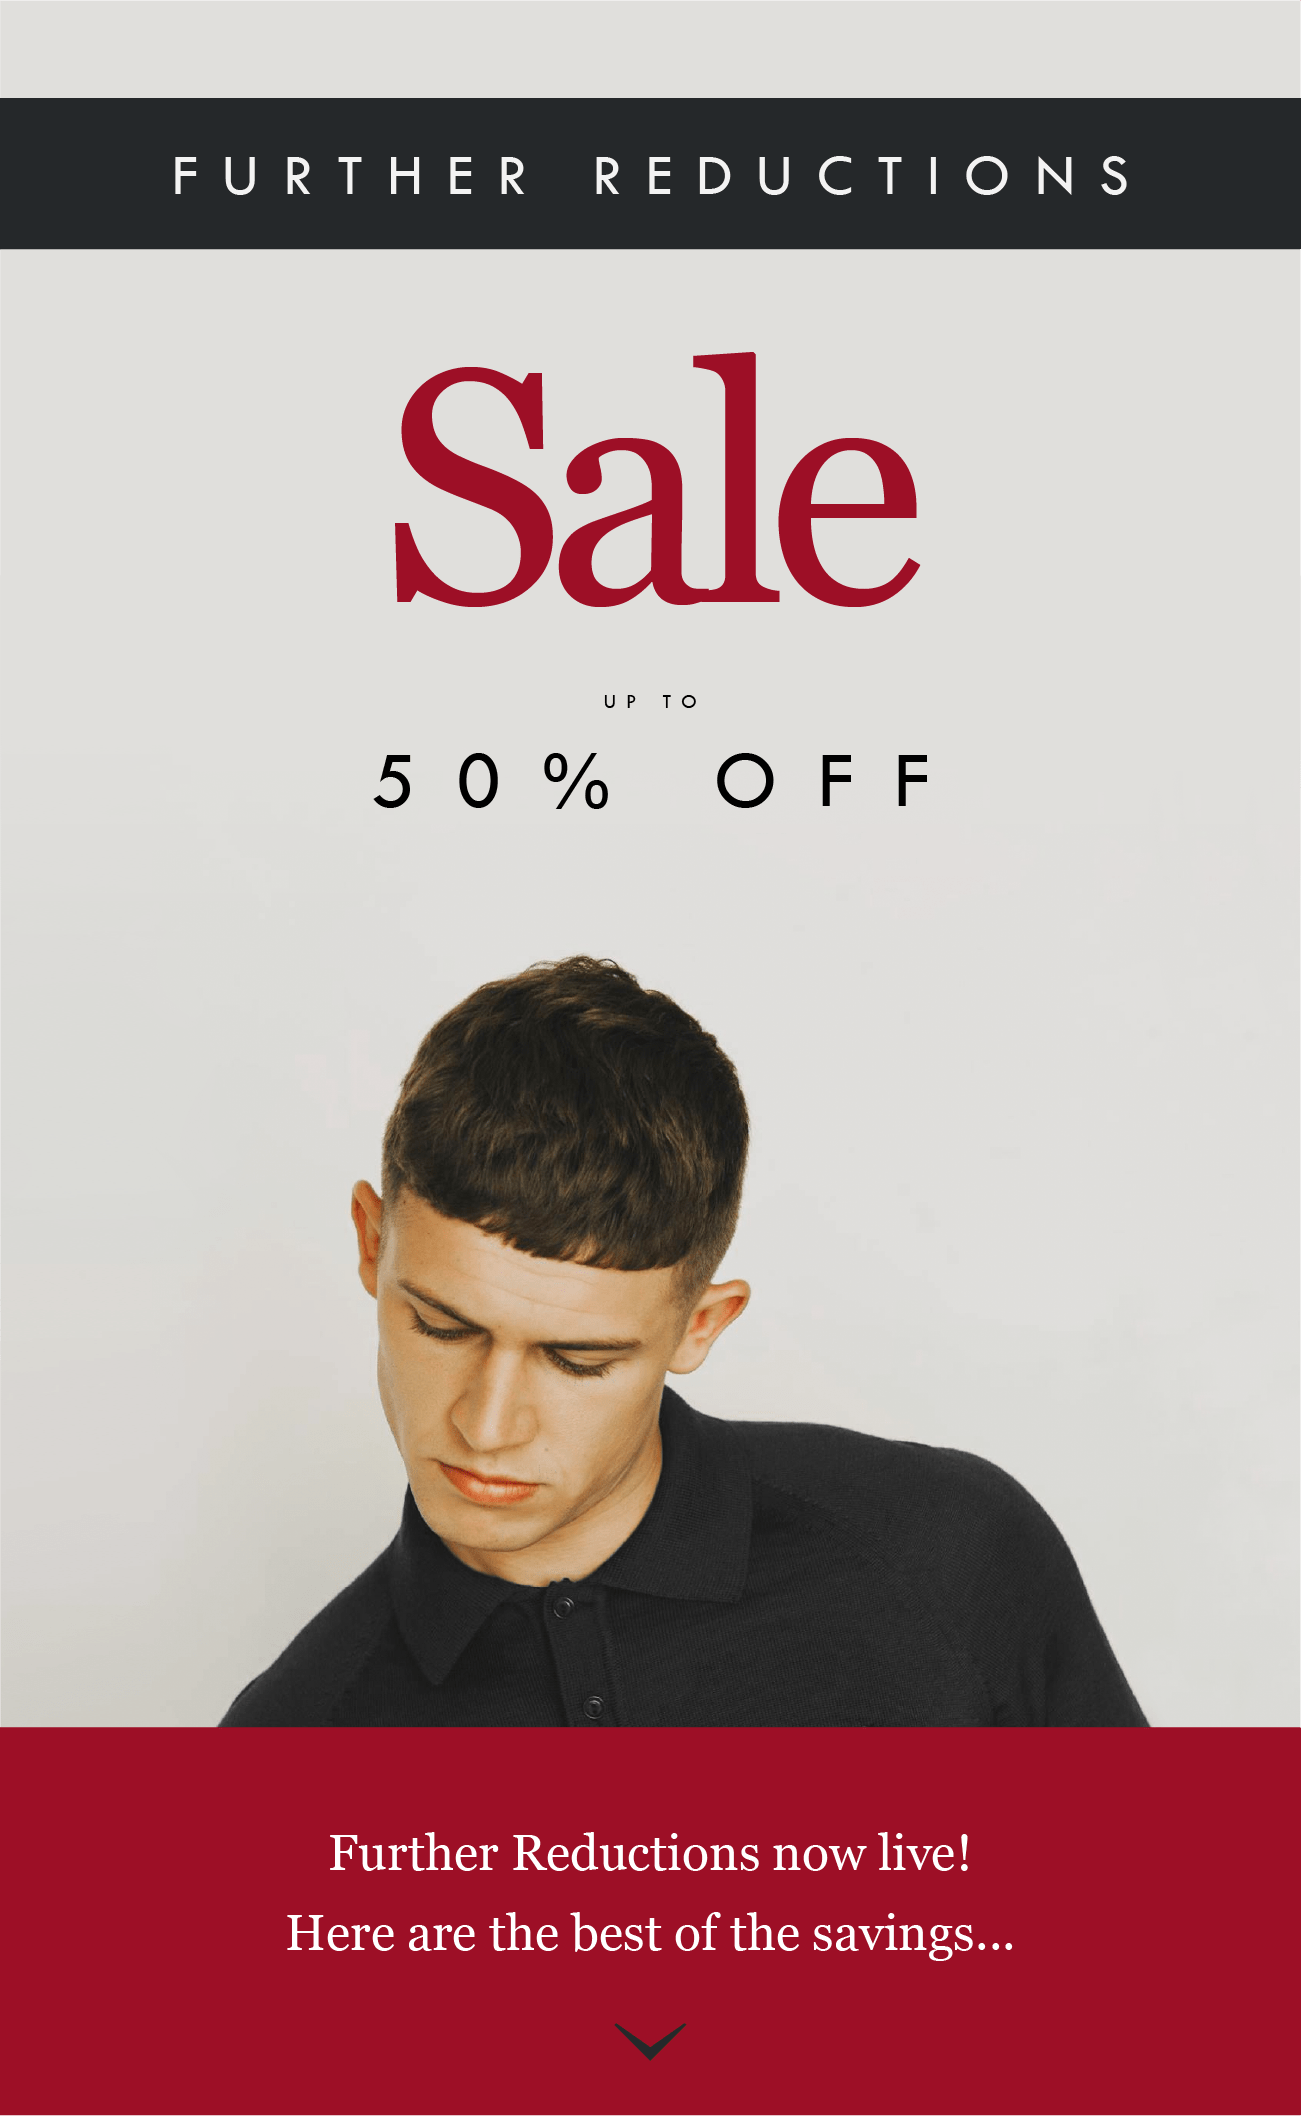 FURTHER REDUCTIONS
Sale
UP TO 50% OFF

Further Reductions now live! Here are the best of the savings..